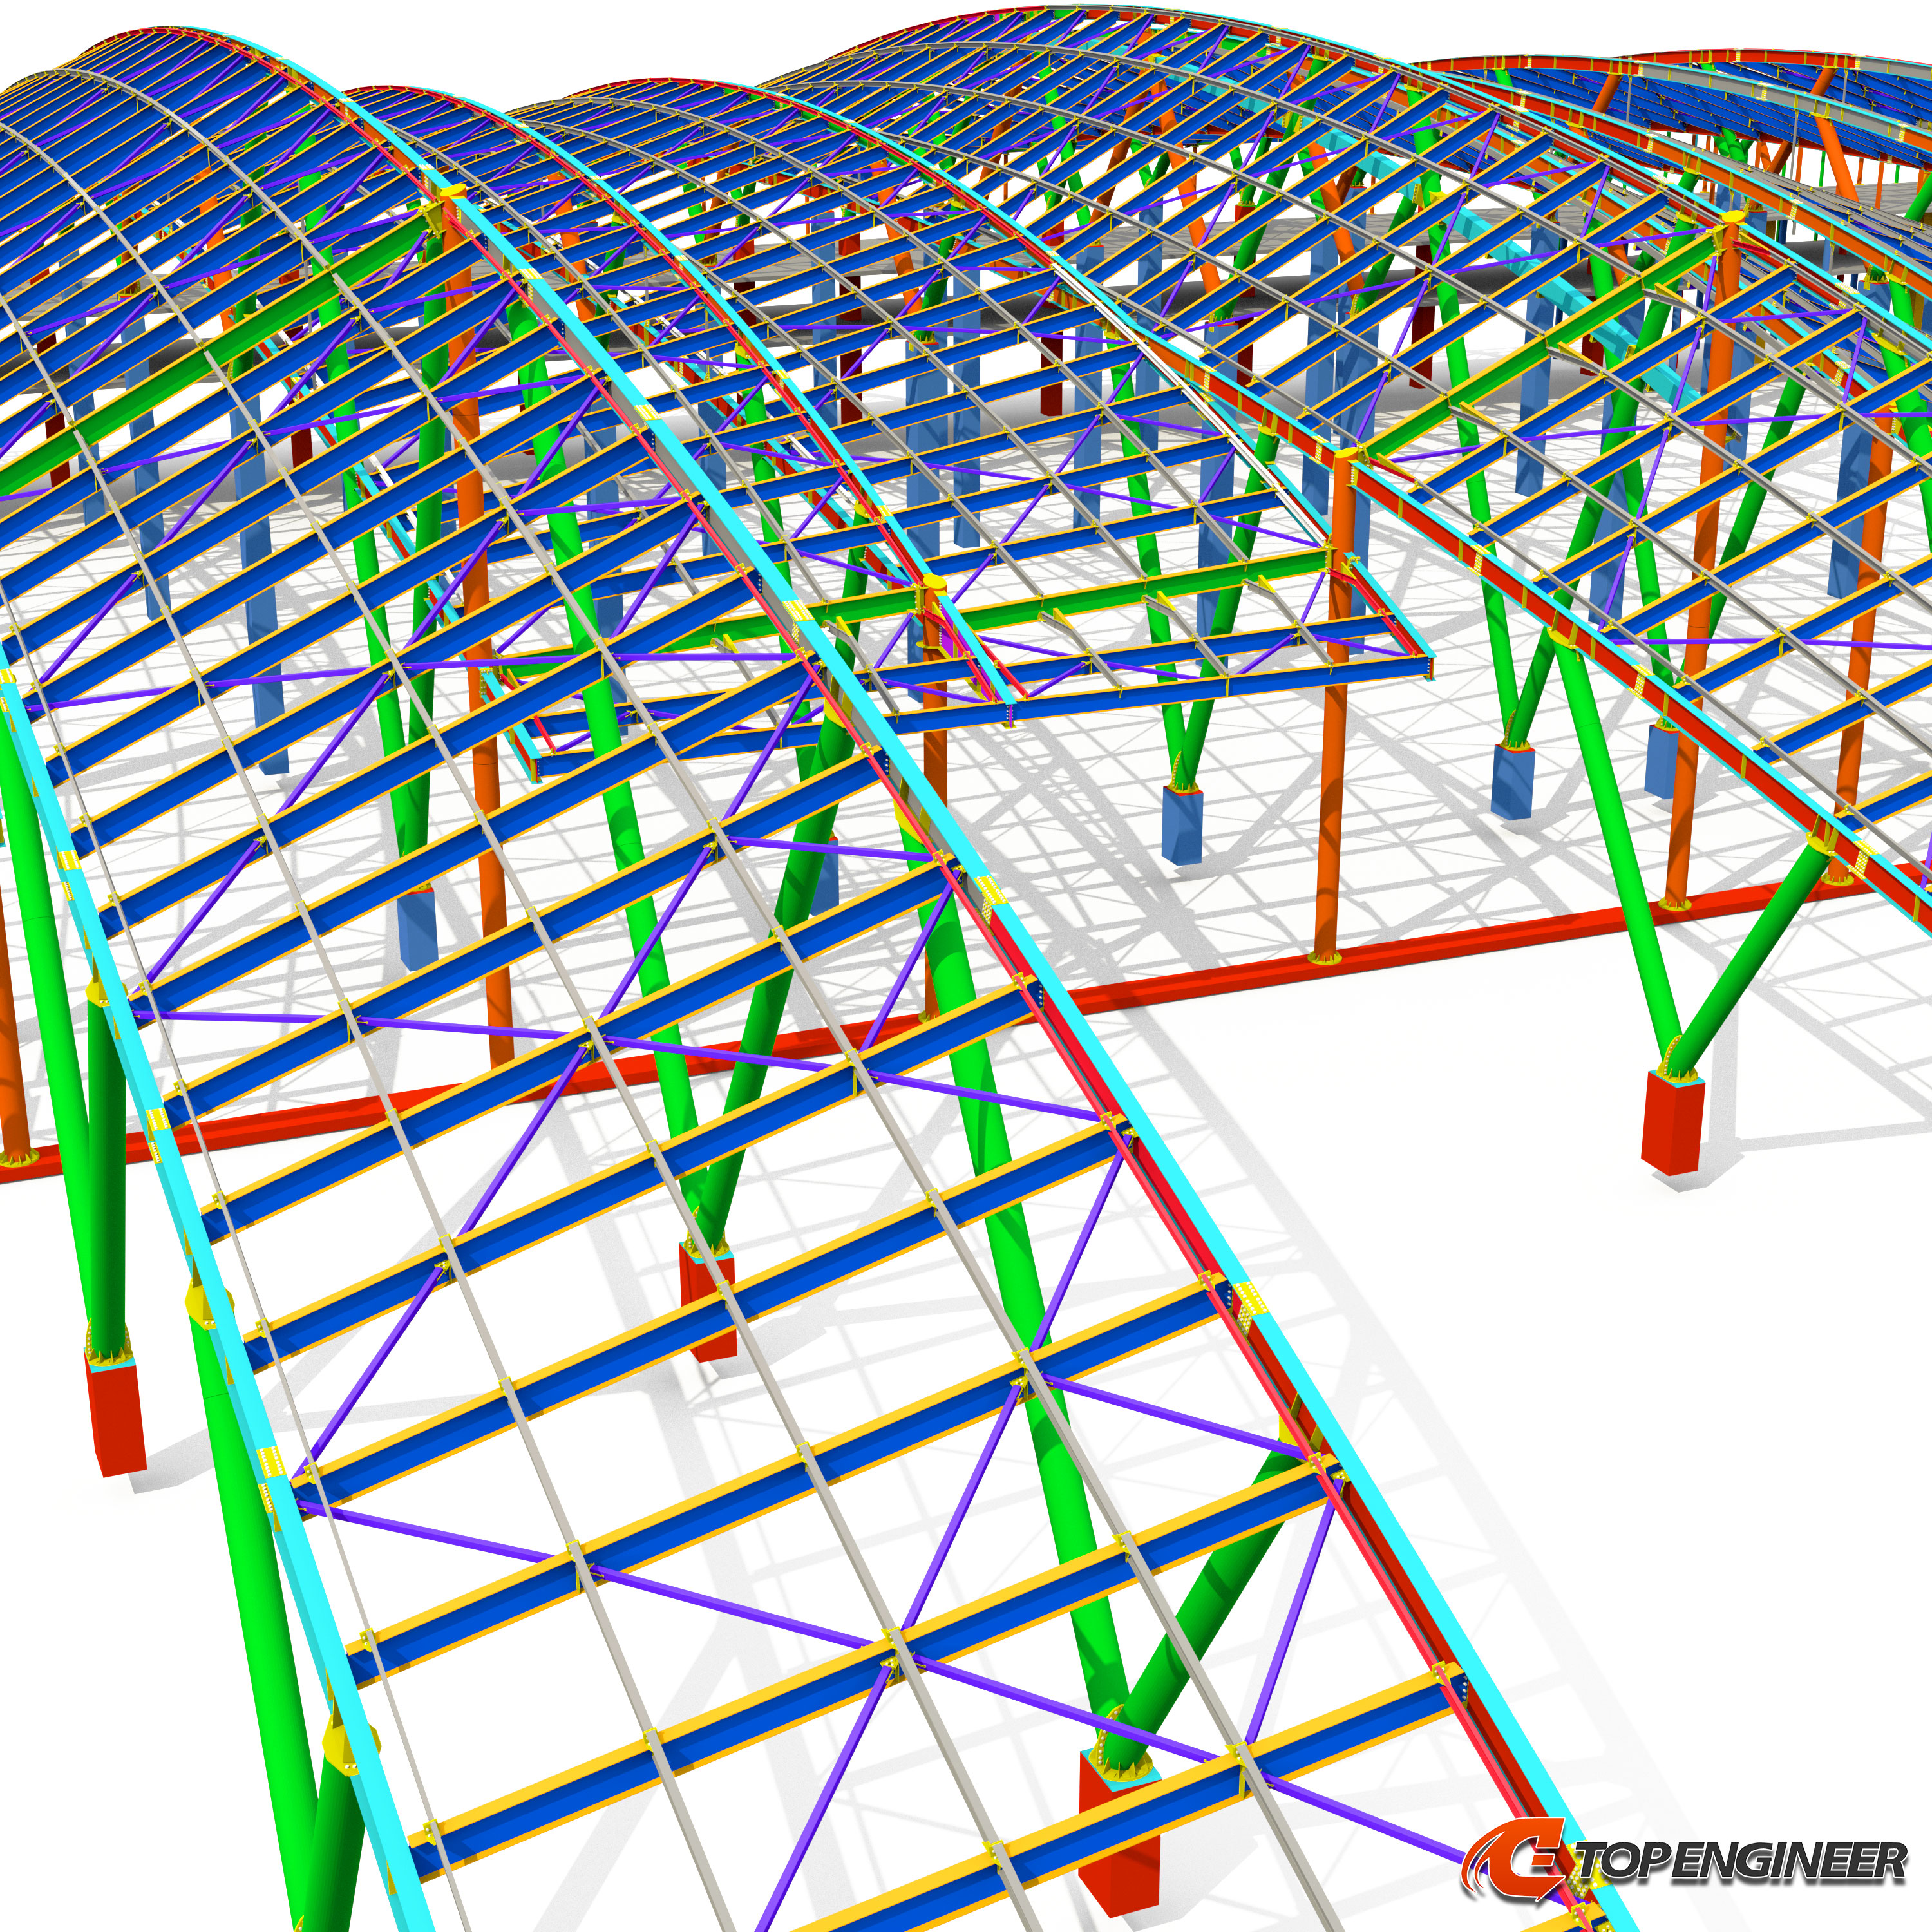 Steel detailing in Tekla Structures for the airport